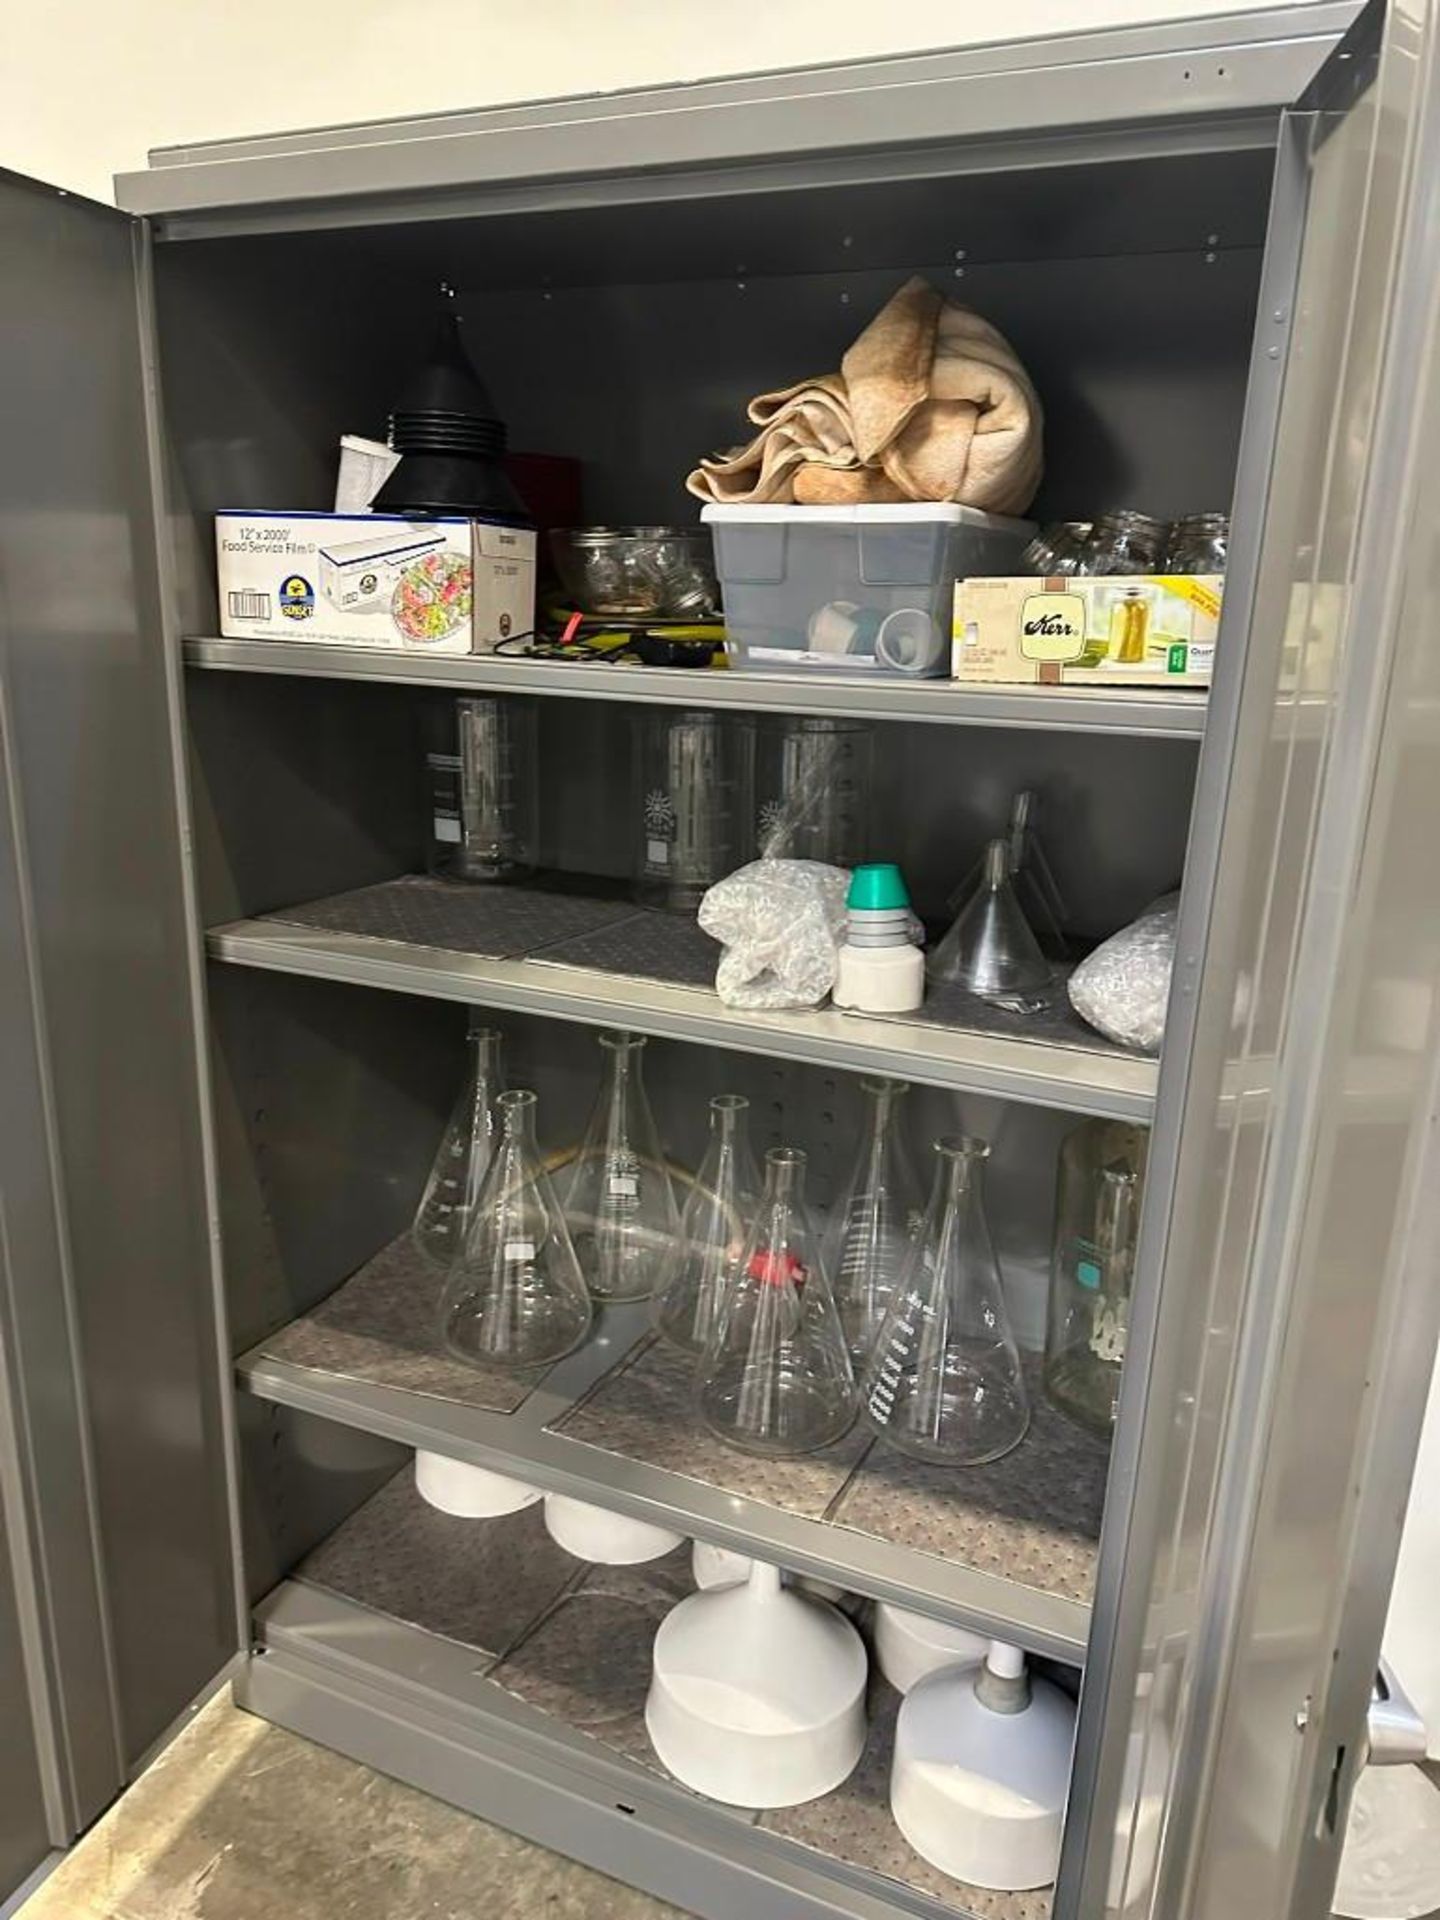 Lot: Uline Steel Cabinet with Assorted Glassware and Misc. Contents - Image 3 of 6